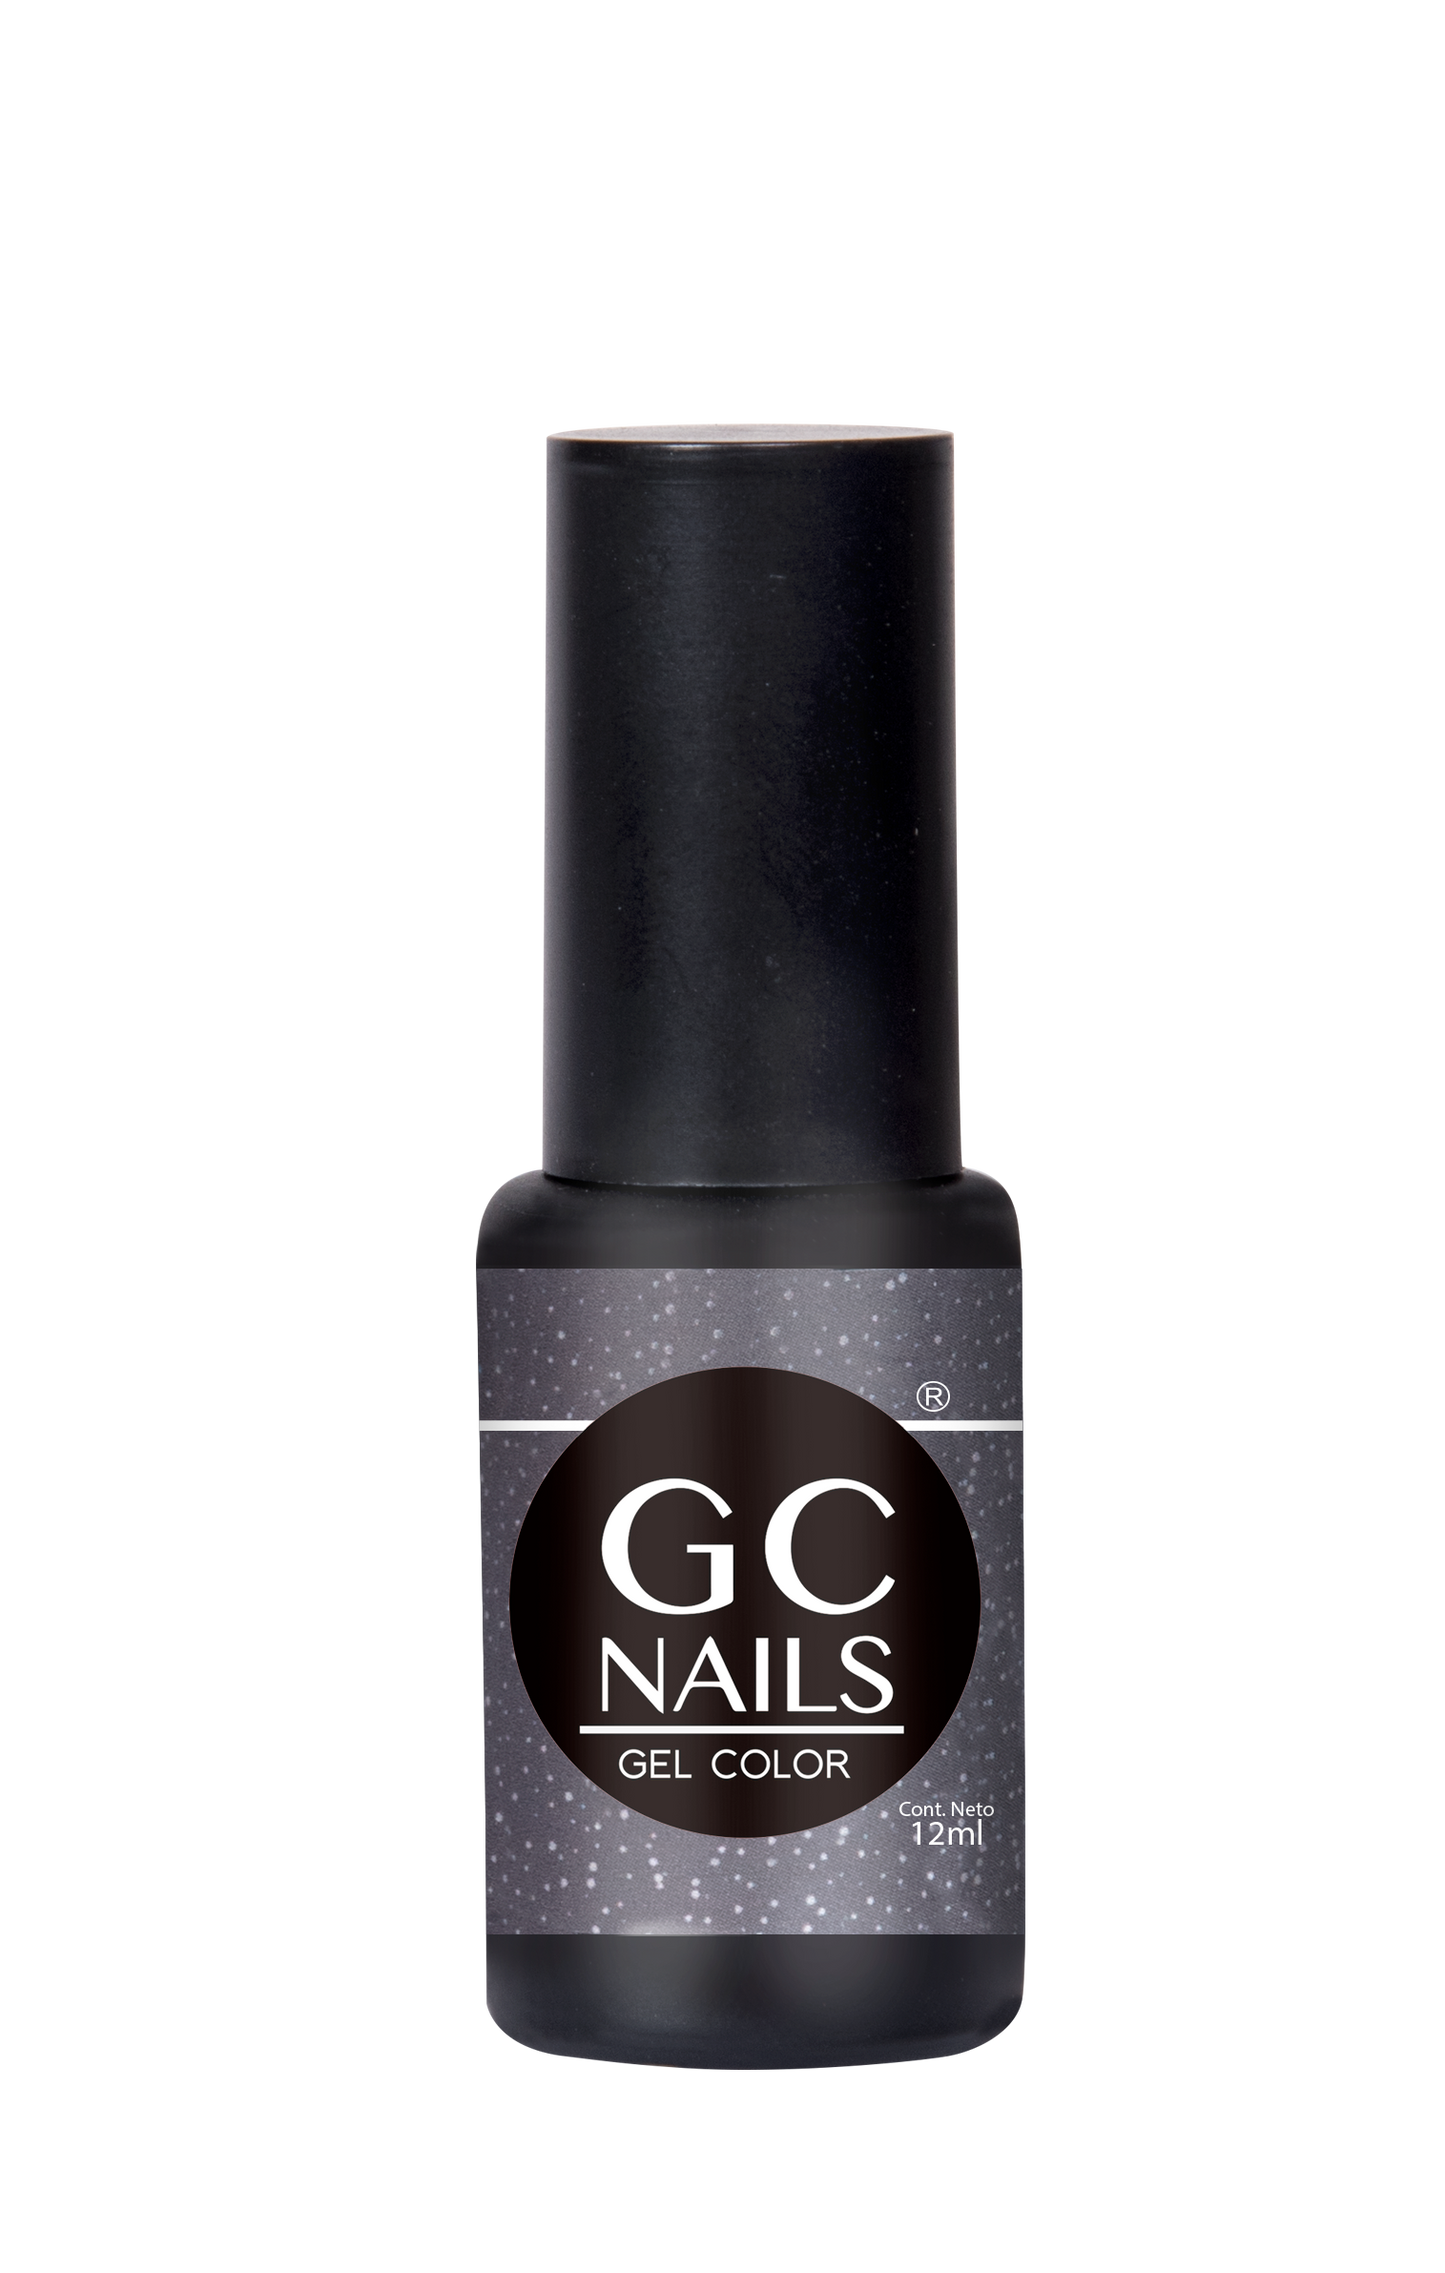 GC nails bel-color 12ml FOSSIL 102